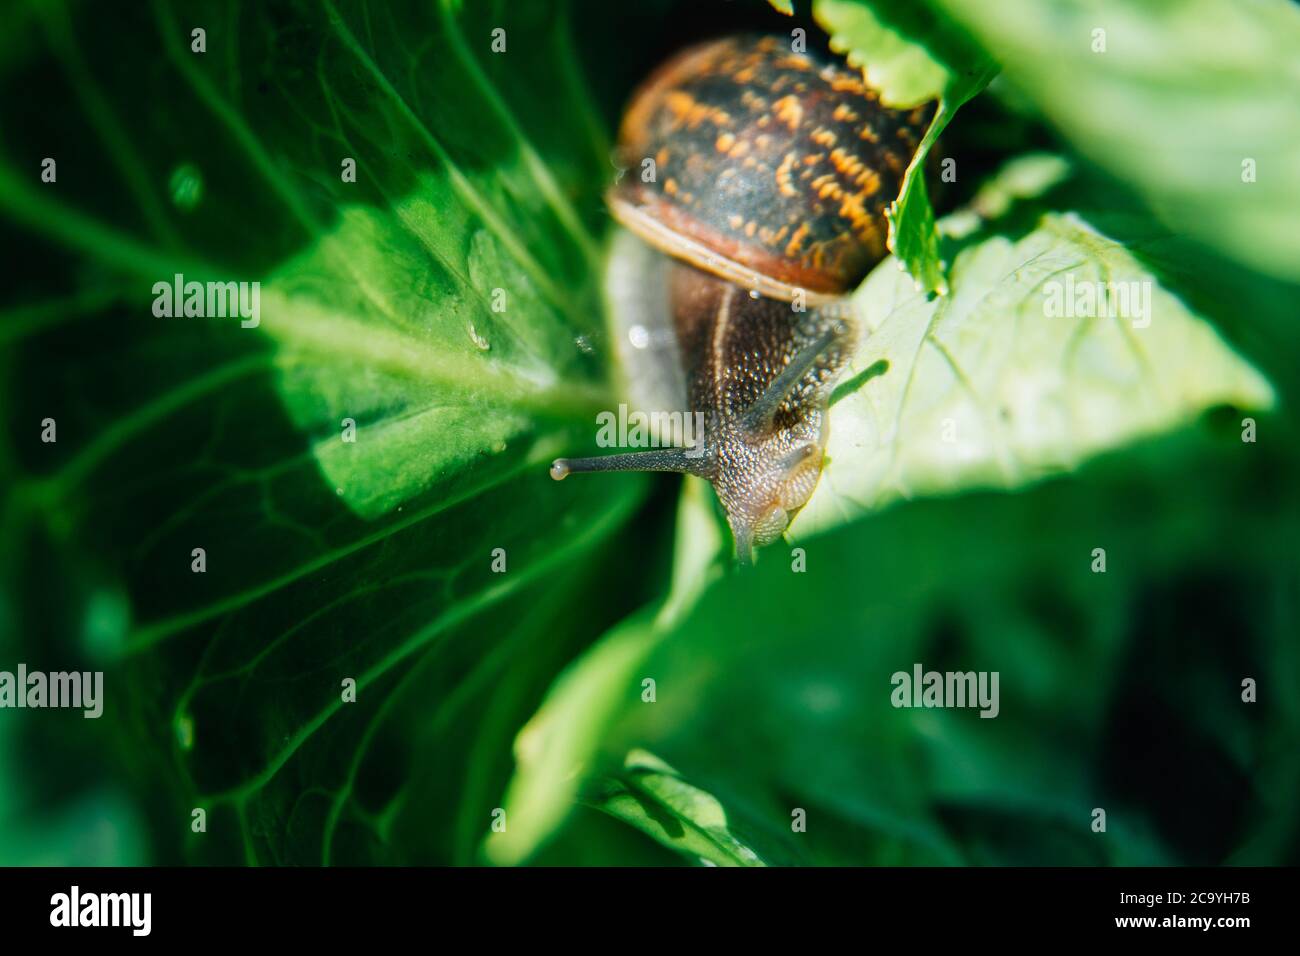 a snail eating a cabbage in a garden vegetable patch or allotment. Cabbage being eaten by snail outside Stock Photo